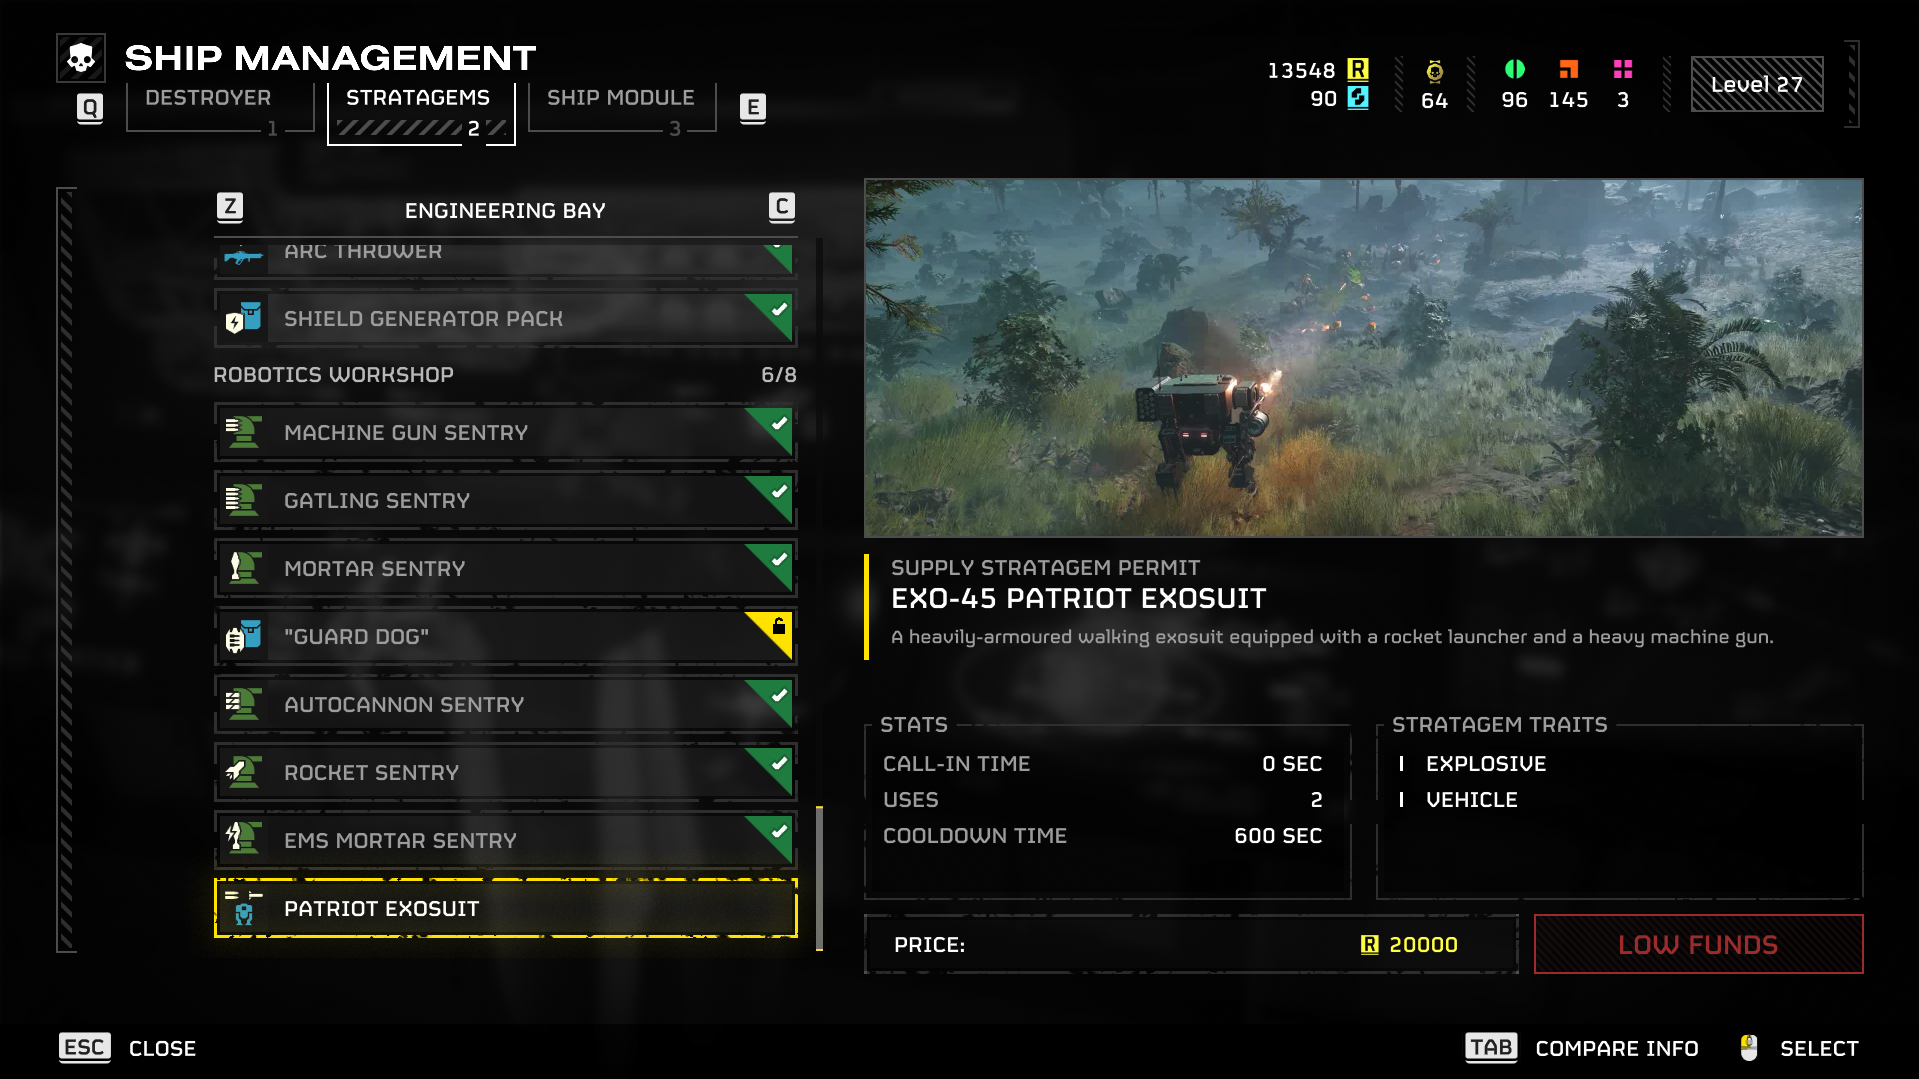 An image of the ship management screen for the EXO-45 Patriot suit